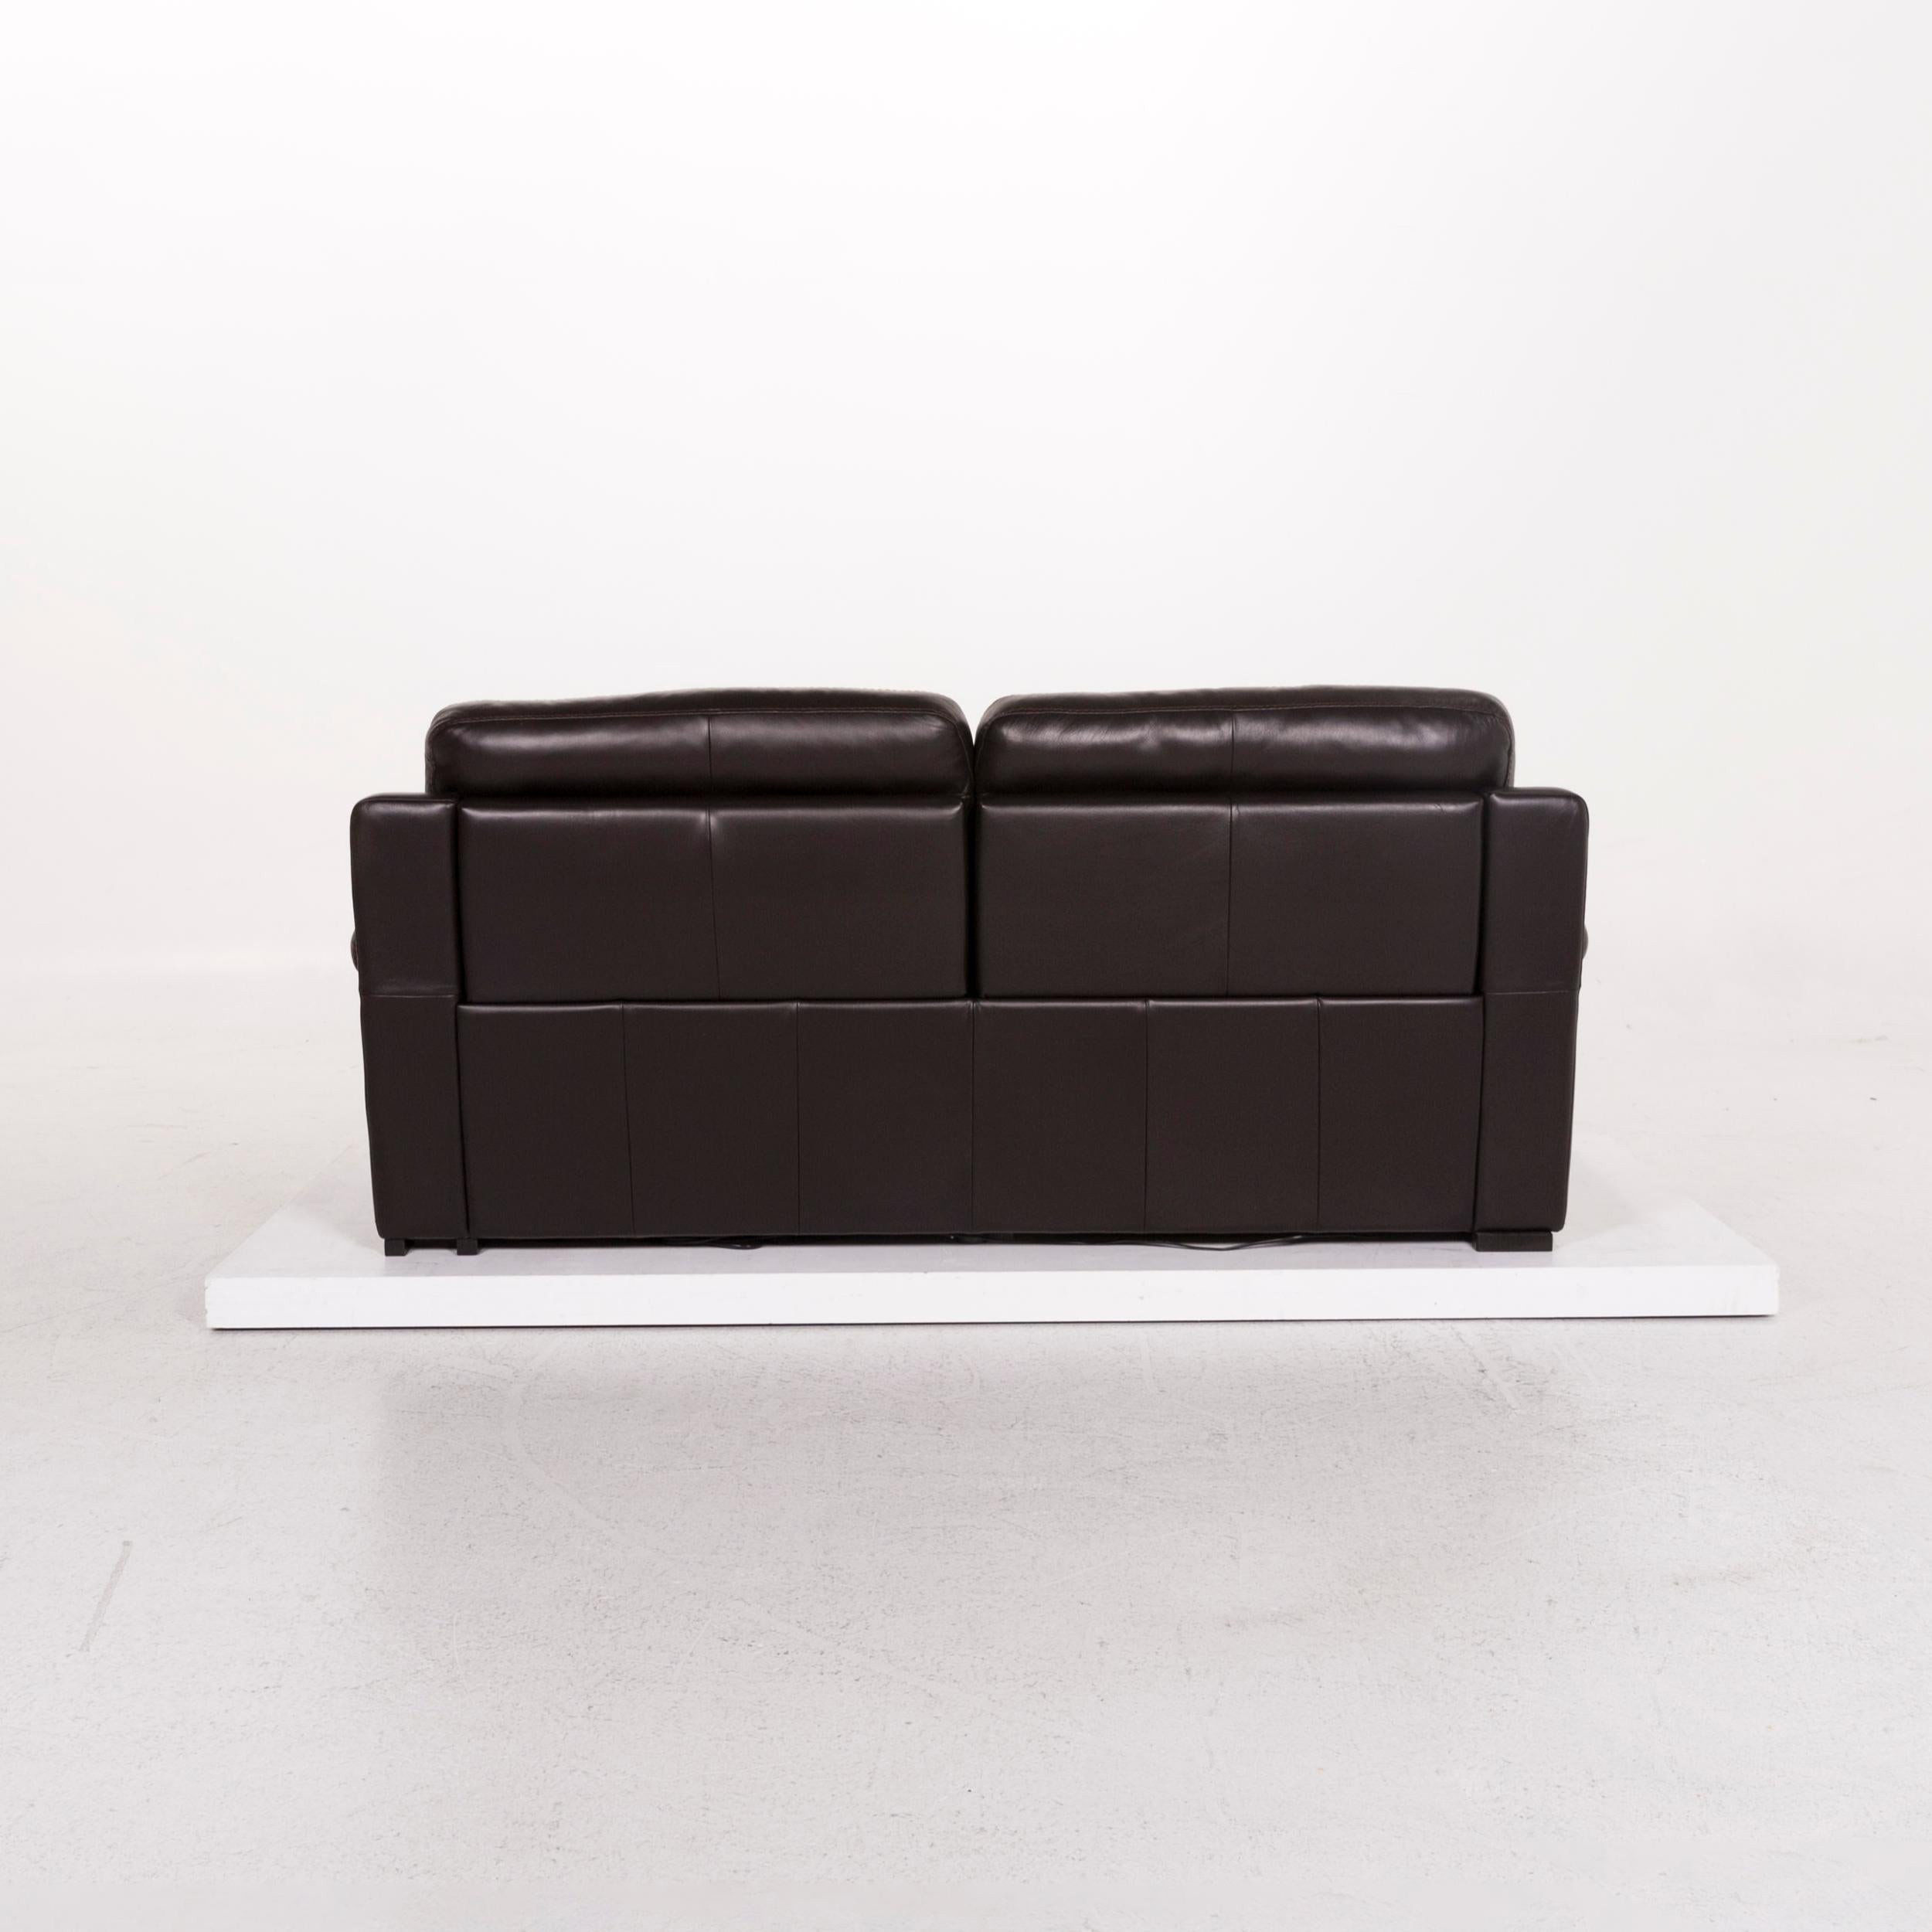 Natuzzi Leather Sofa Brown Dark Brown Three-Seat Function Relax Function Couch 3